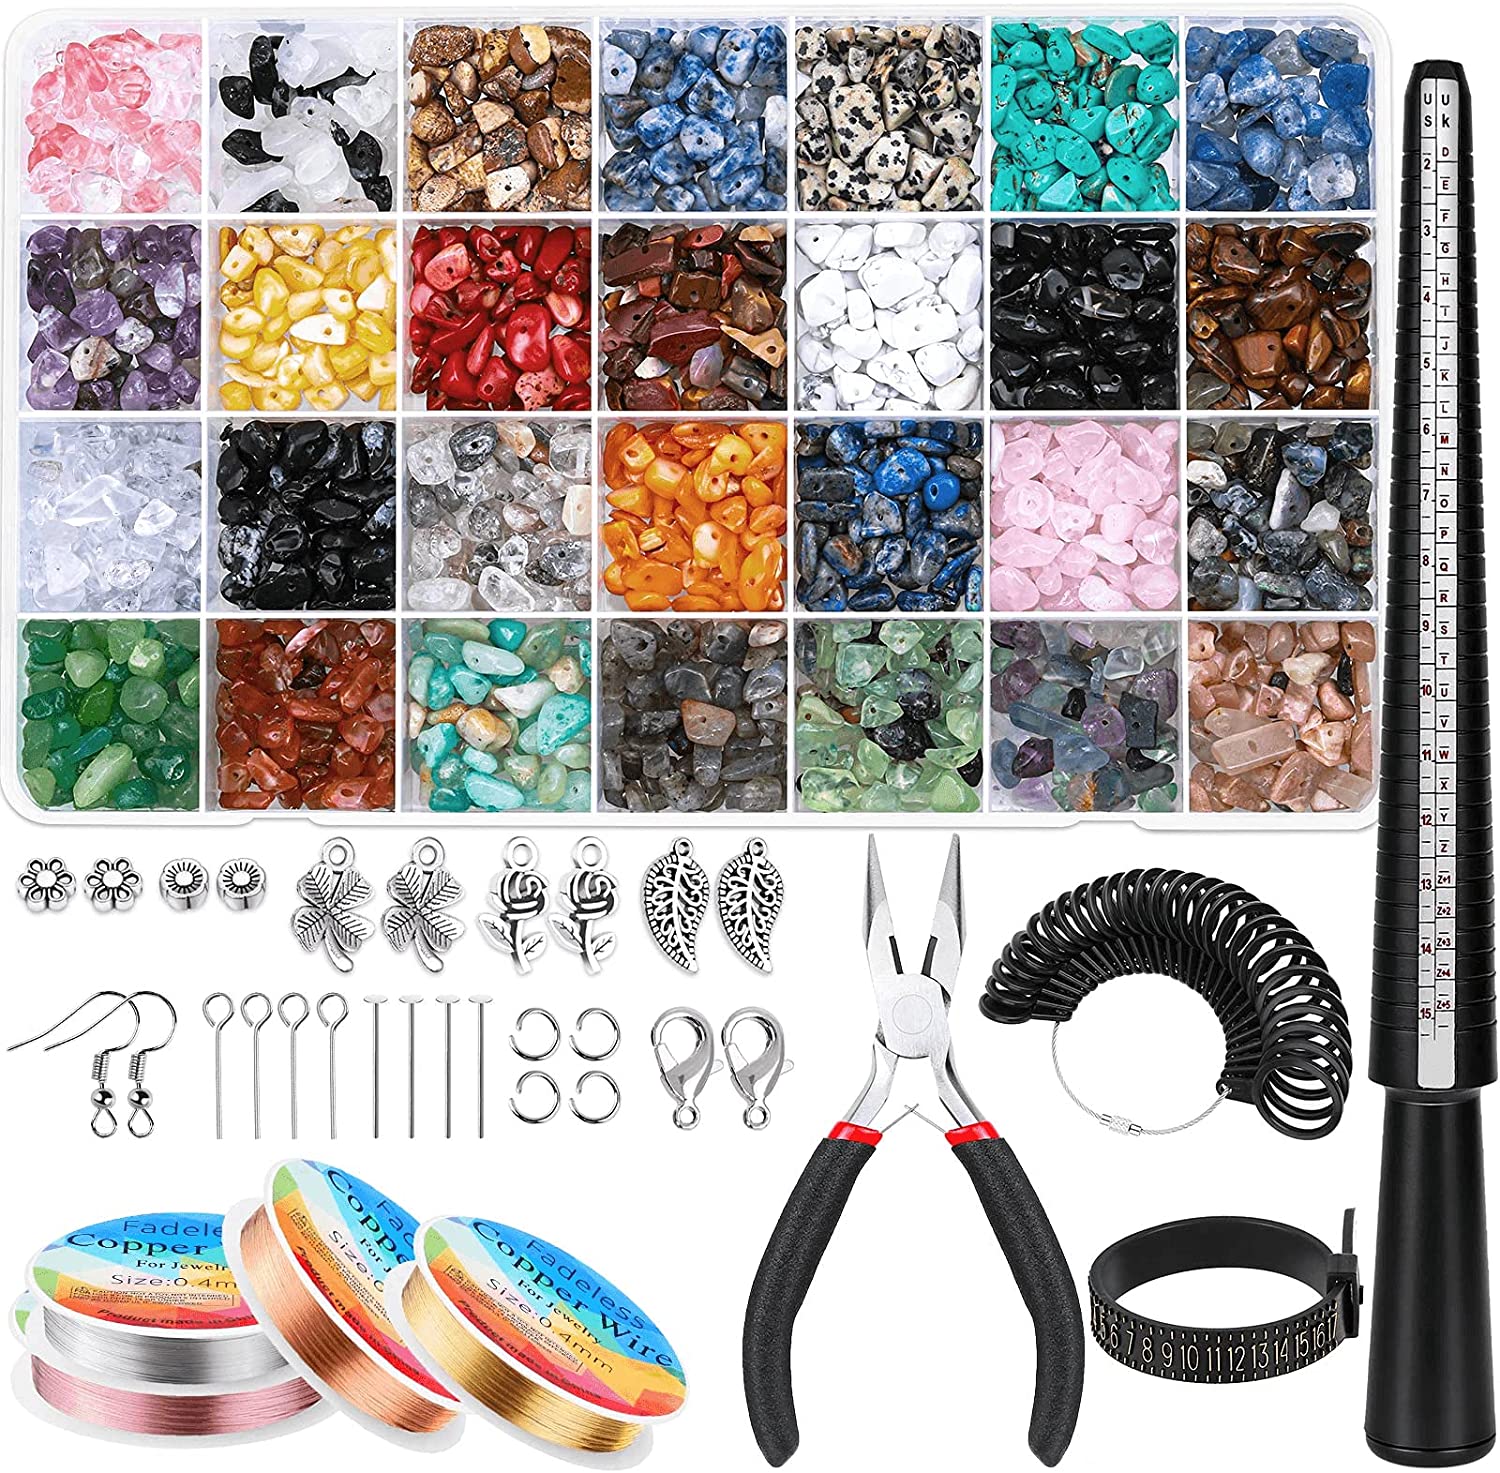 Ring Making Kit, 1718Pcs Jewelry Making Kit with 28 Colors Crystal Gemstone  Chip Beads, Ring Sizer Tools, Jewelry Wire, Jewelry Pliers and Other